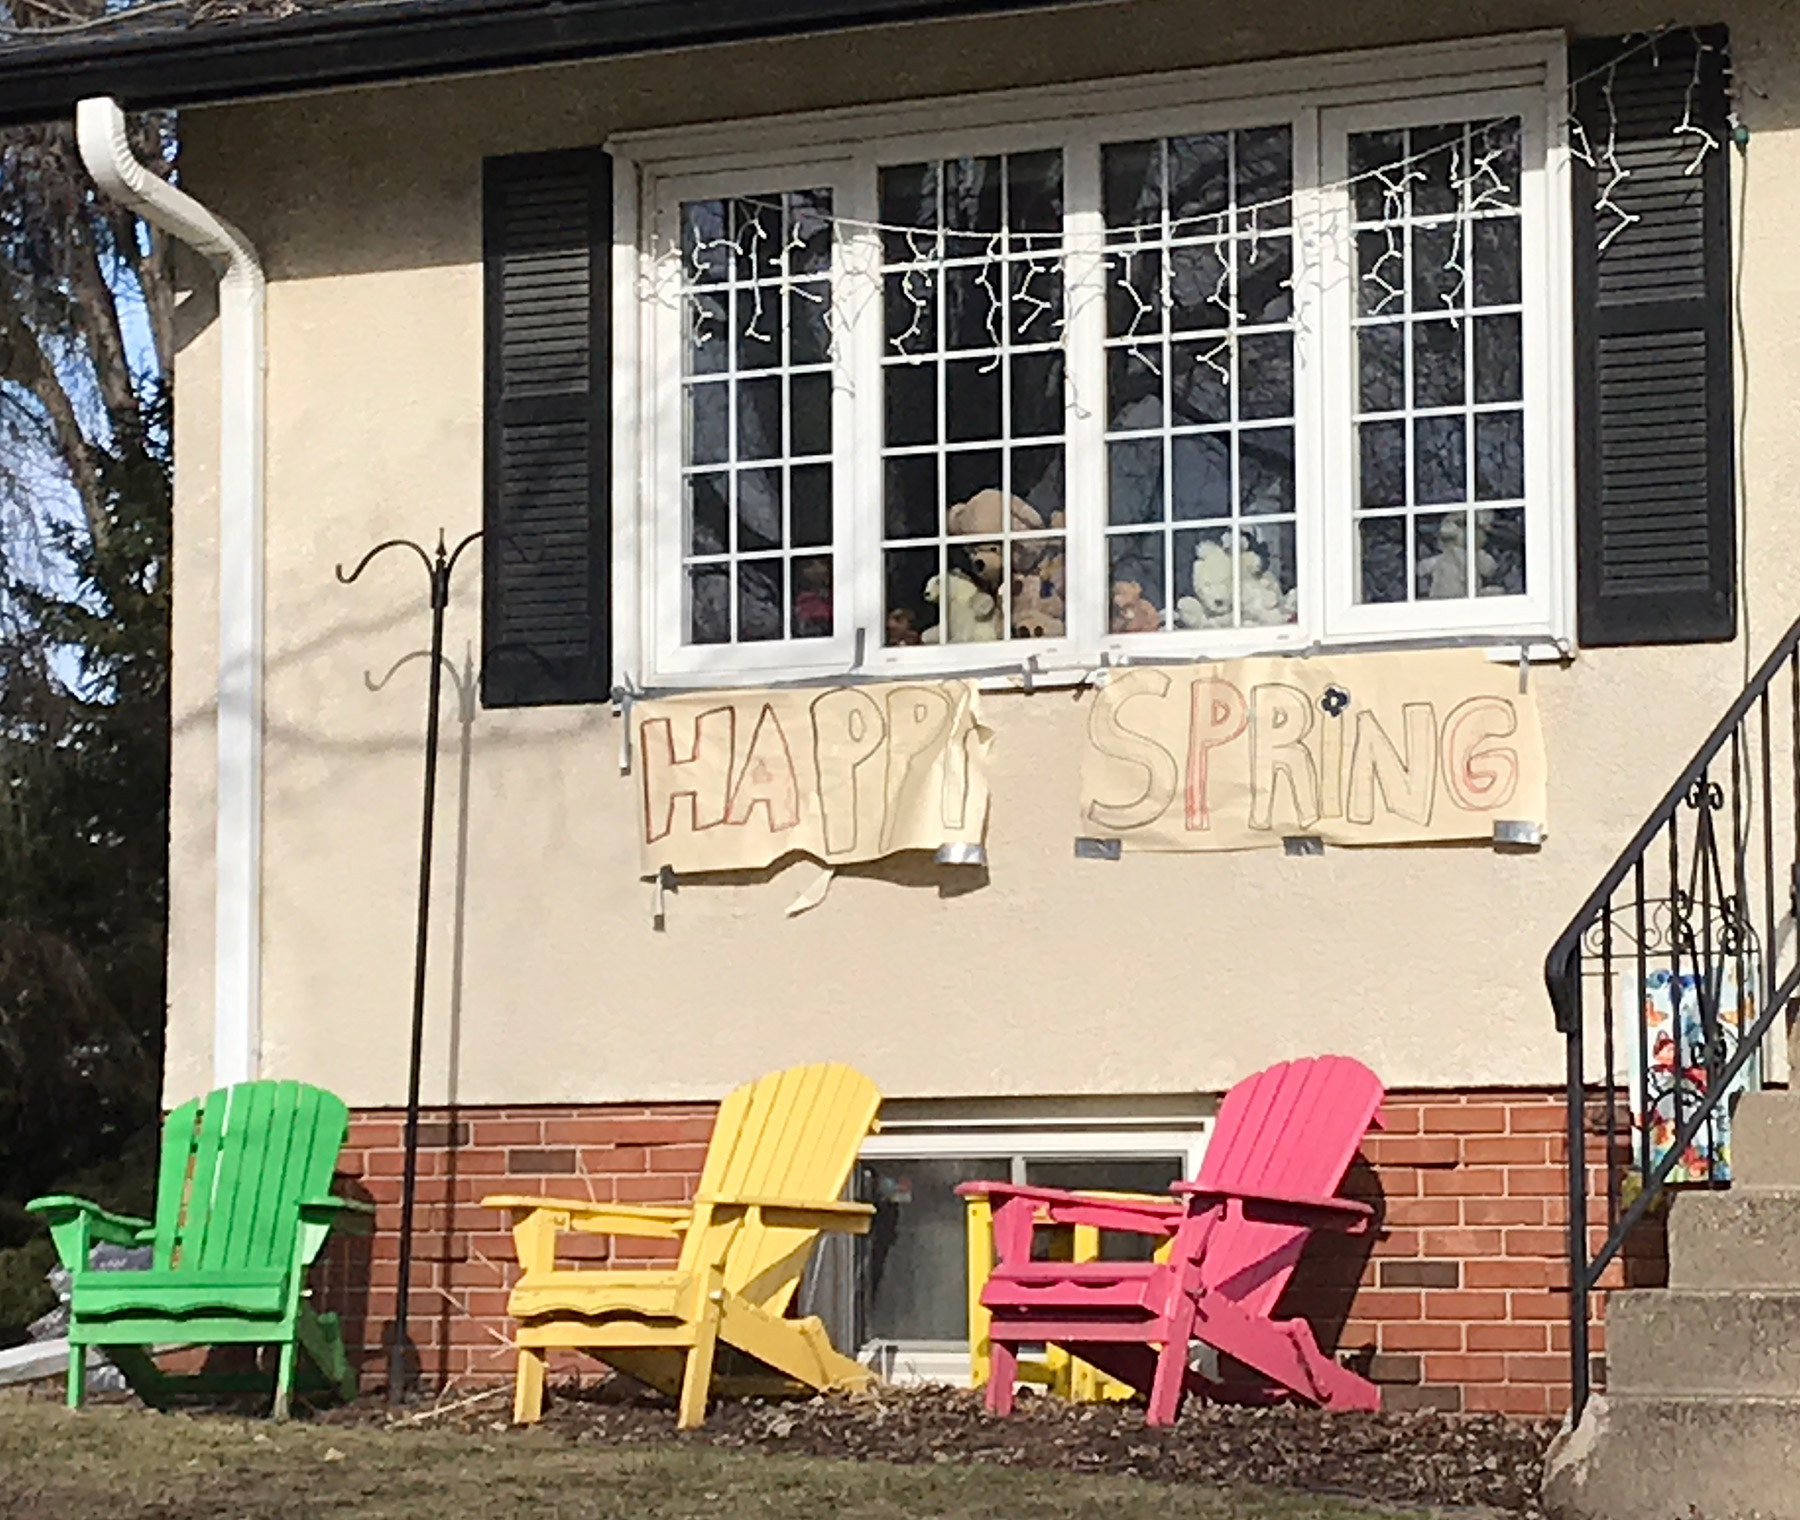 Sign: "Happy Spring"